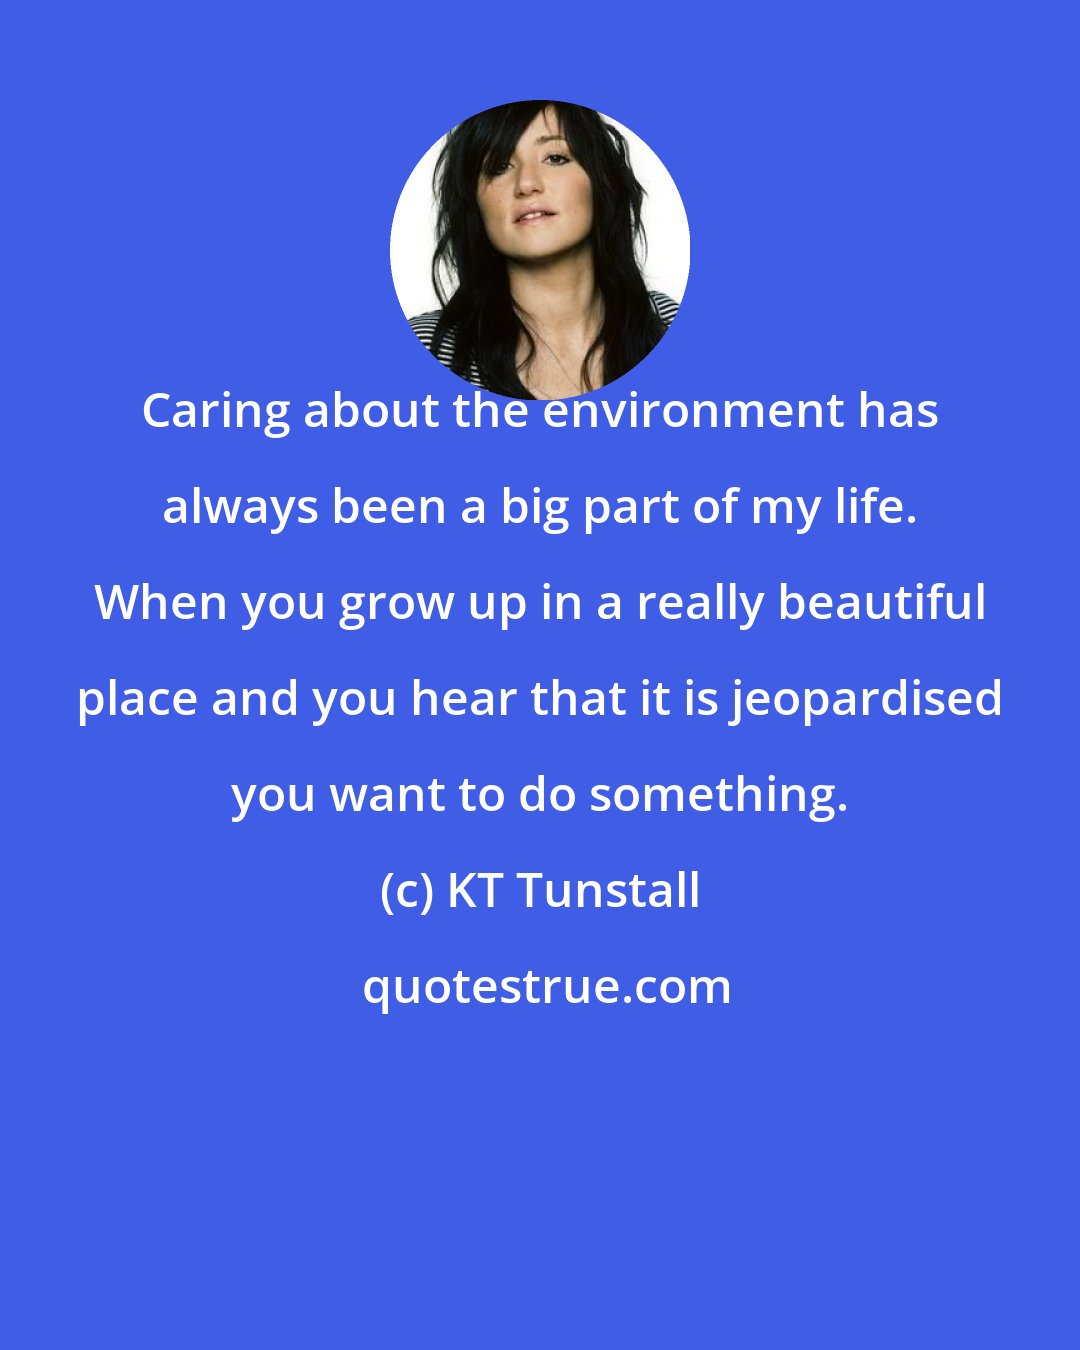 KT Tunstall: Caring about the environment has always been a big part of my life. When you grow up in a really beautiful place and you hear that it is jeopardised you want to do something.